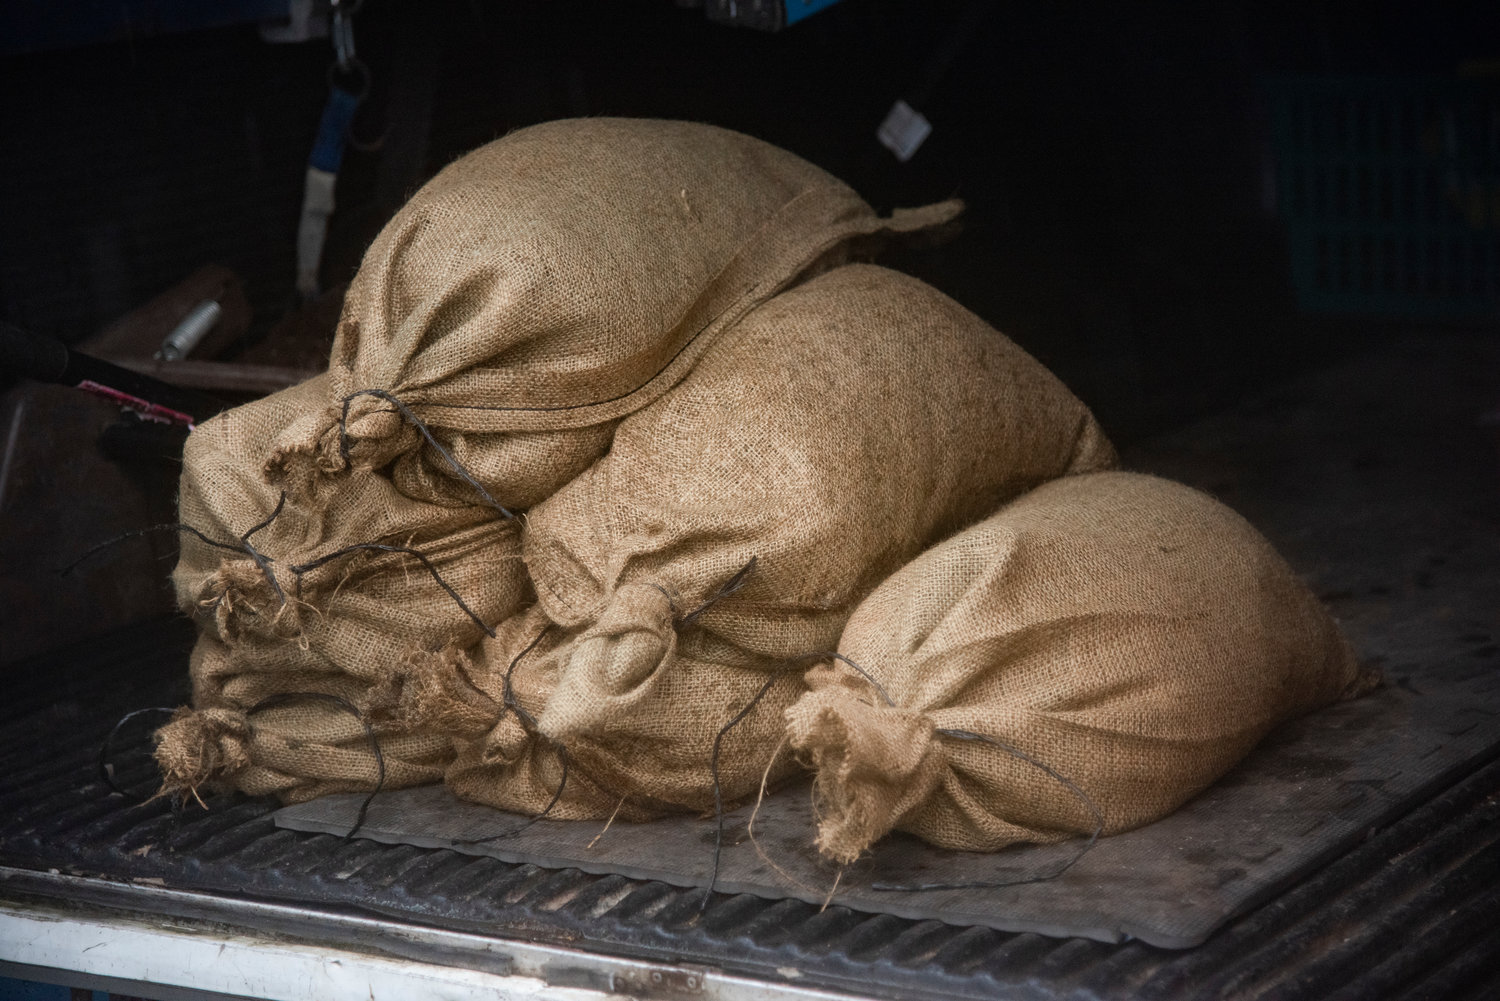 Sandbags are loaded into a vehicle in Centralia Thursday morning.